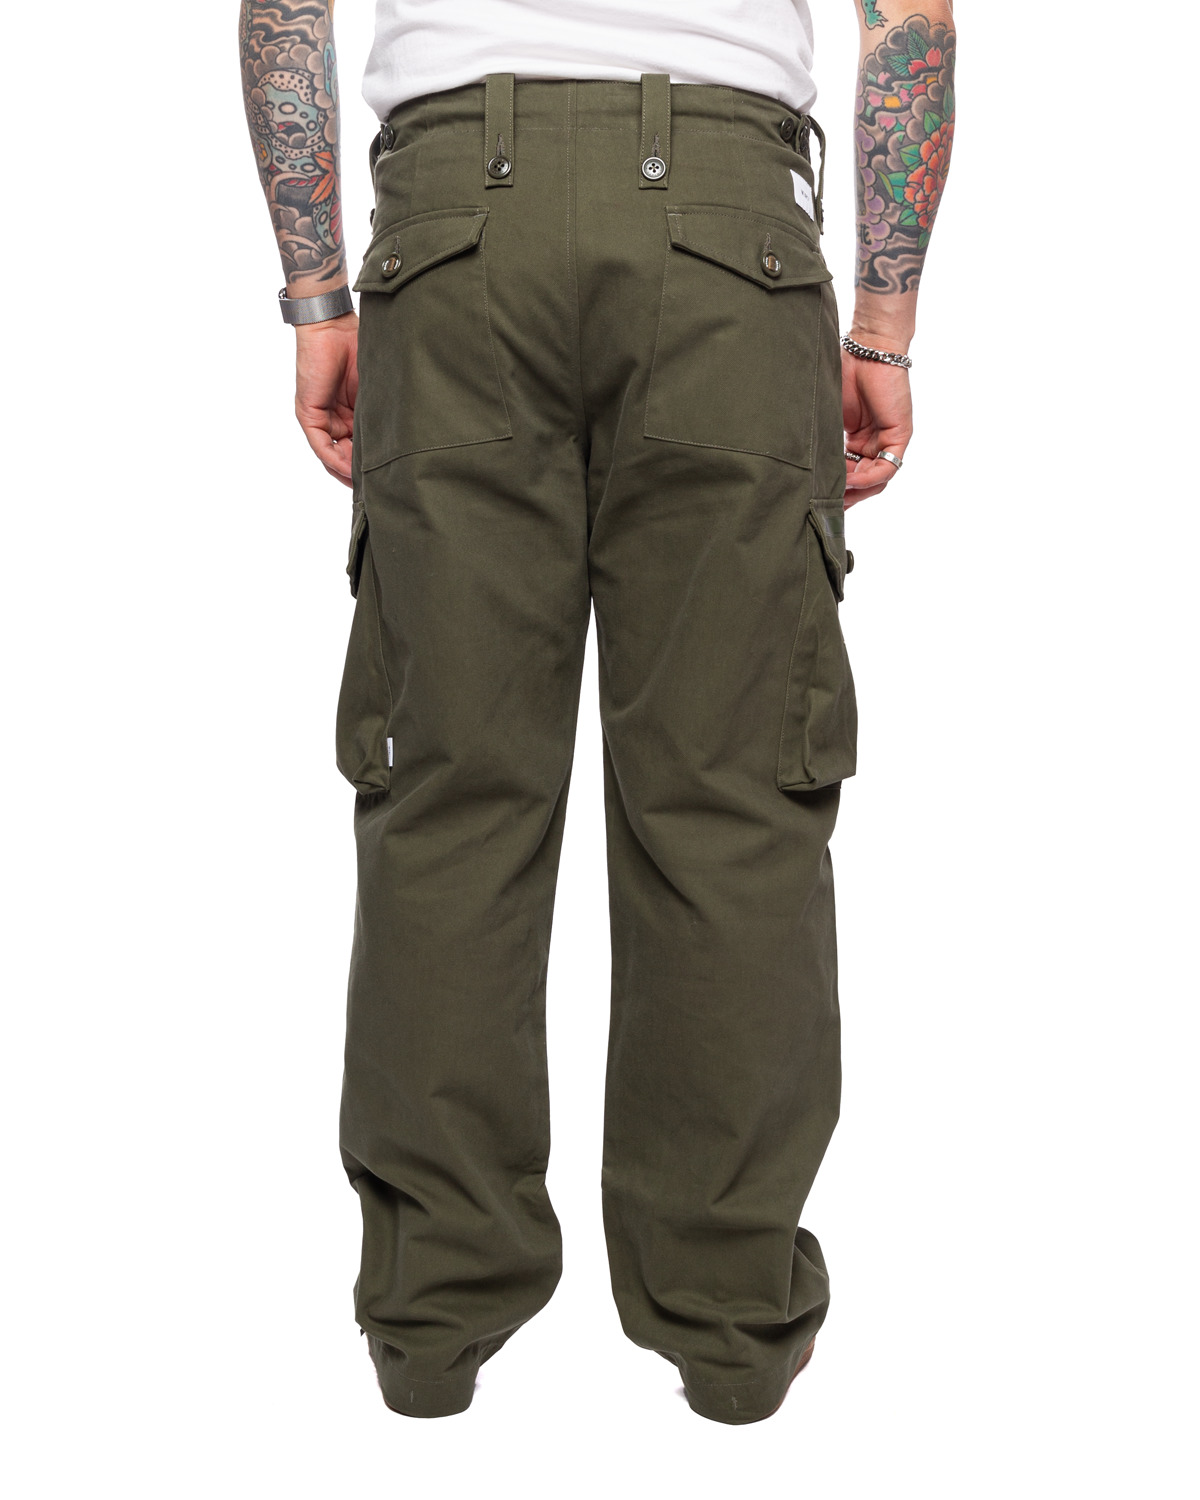 MILT2001/Trousers/Cotton. Twill Olive Drab - 3